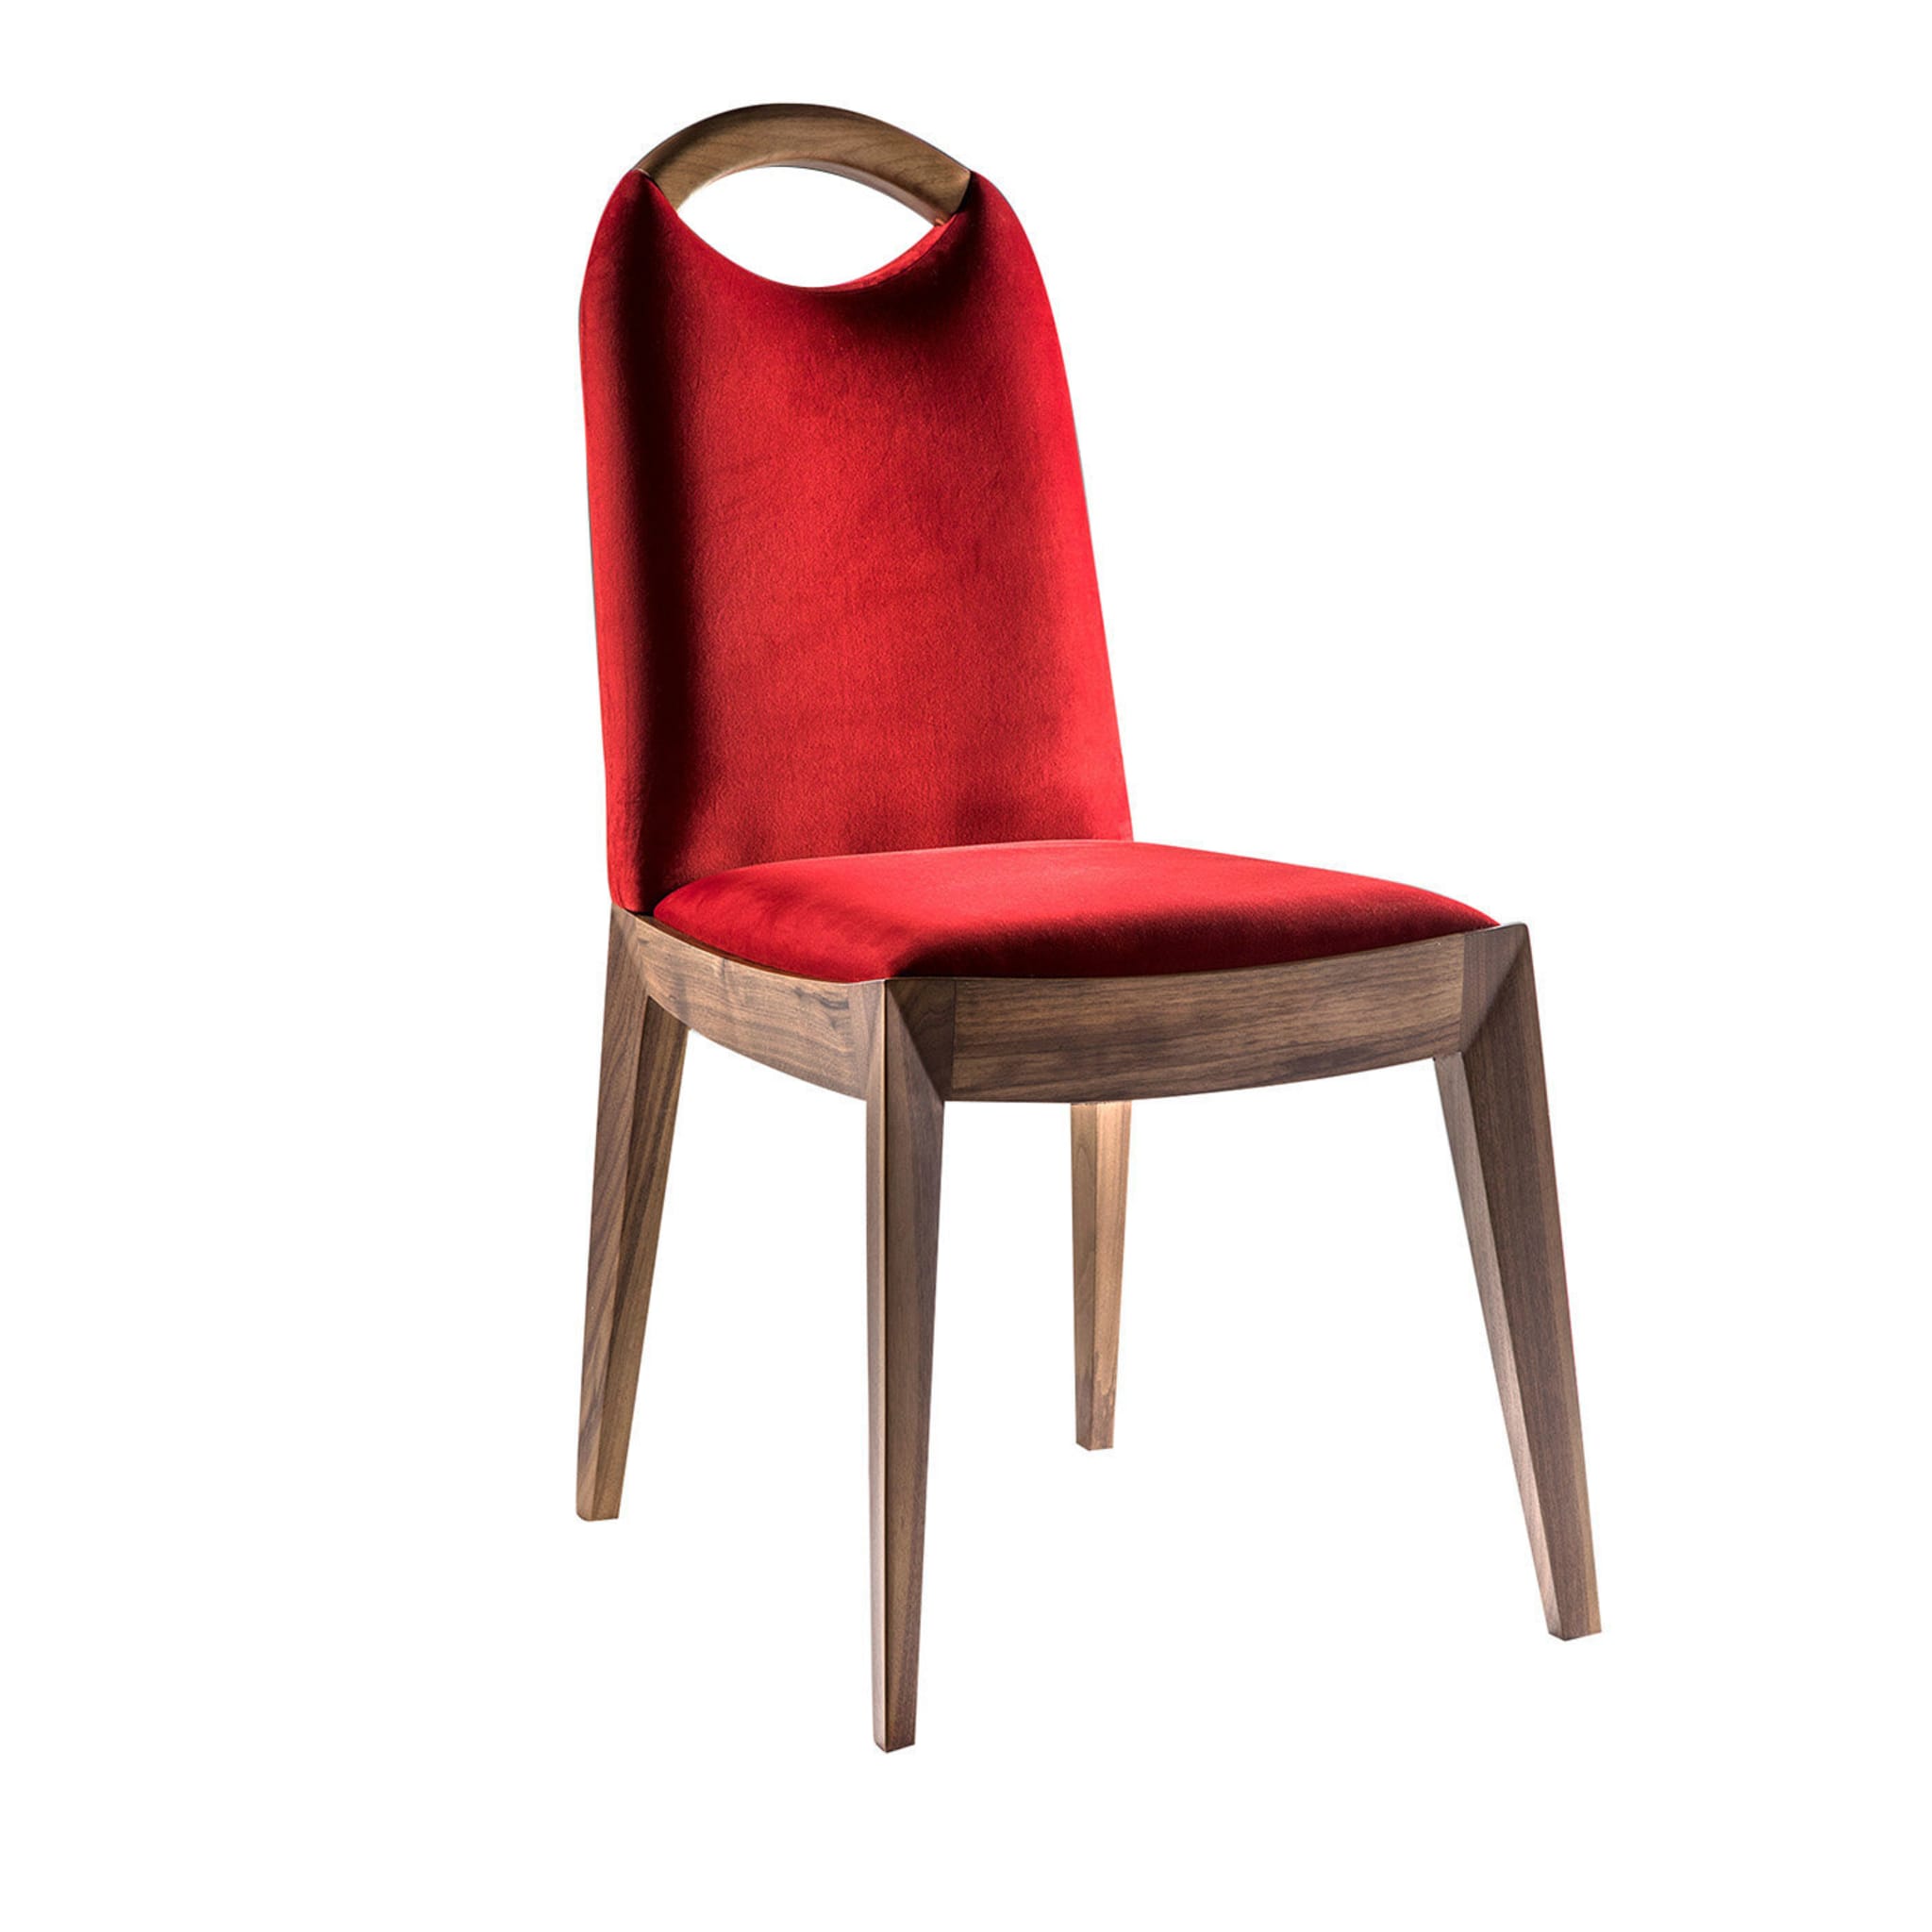 Antonietta Red Chair by Simone Ciarmoli and Miguel Queda - Main view